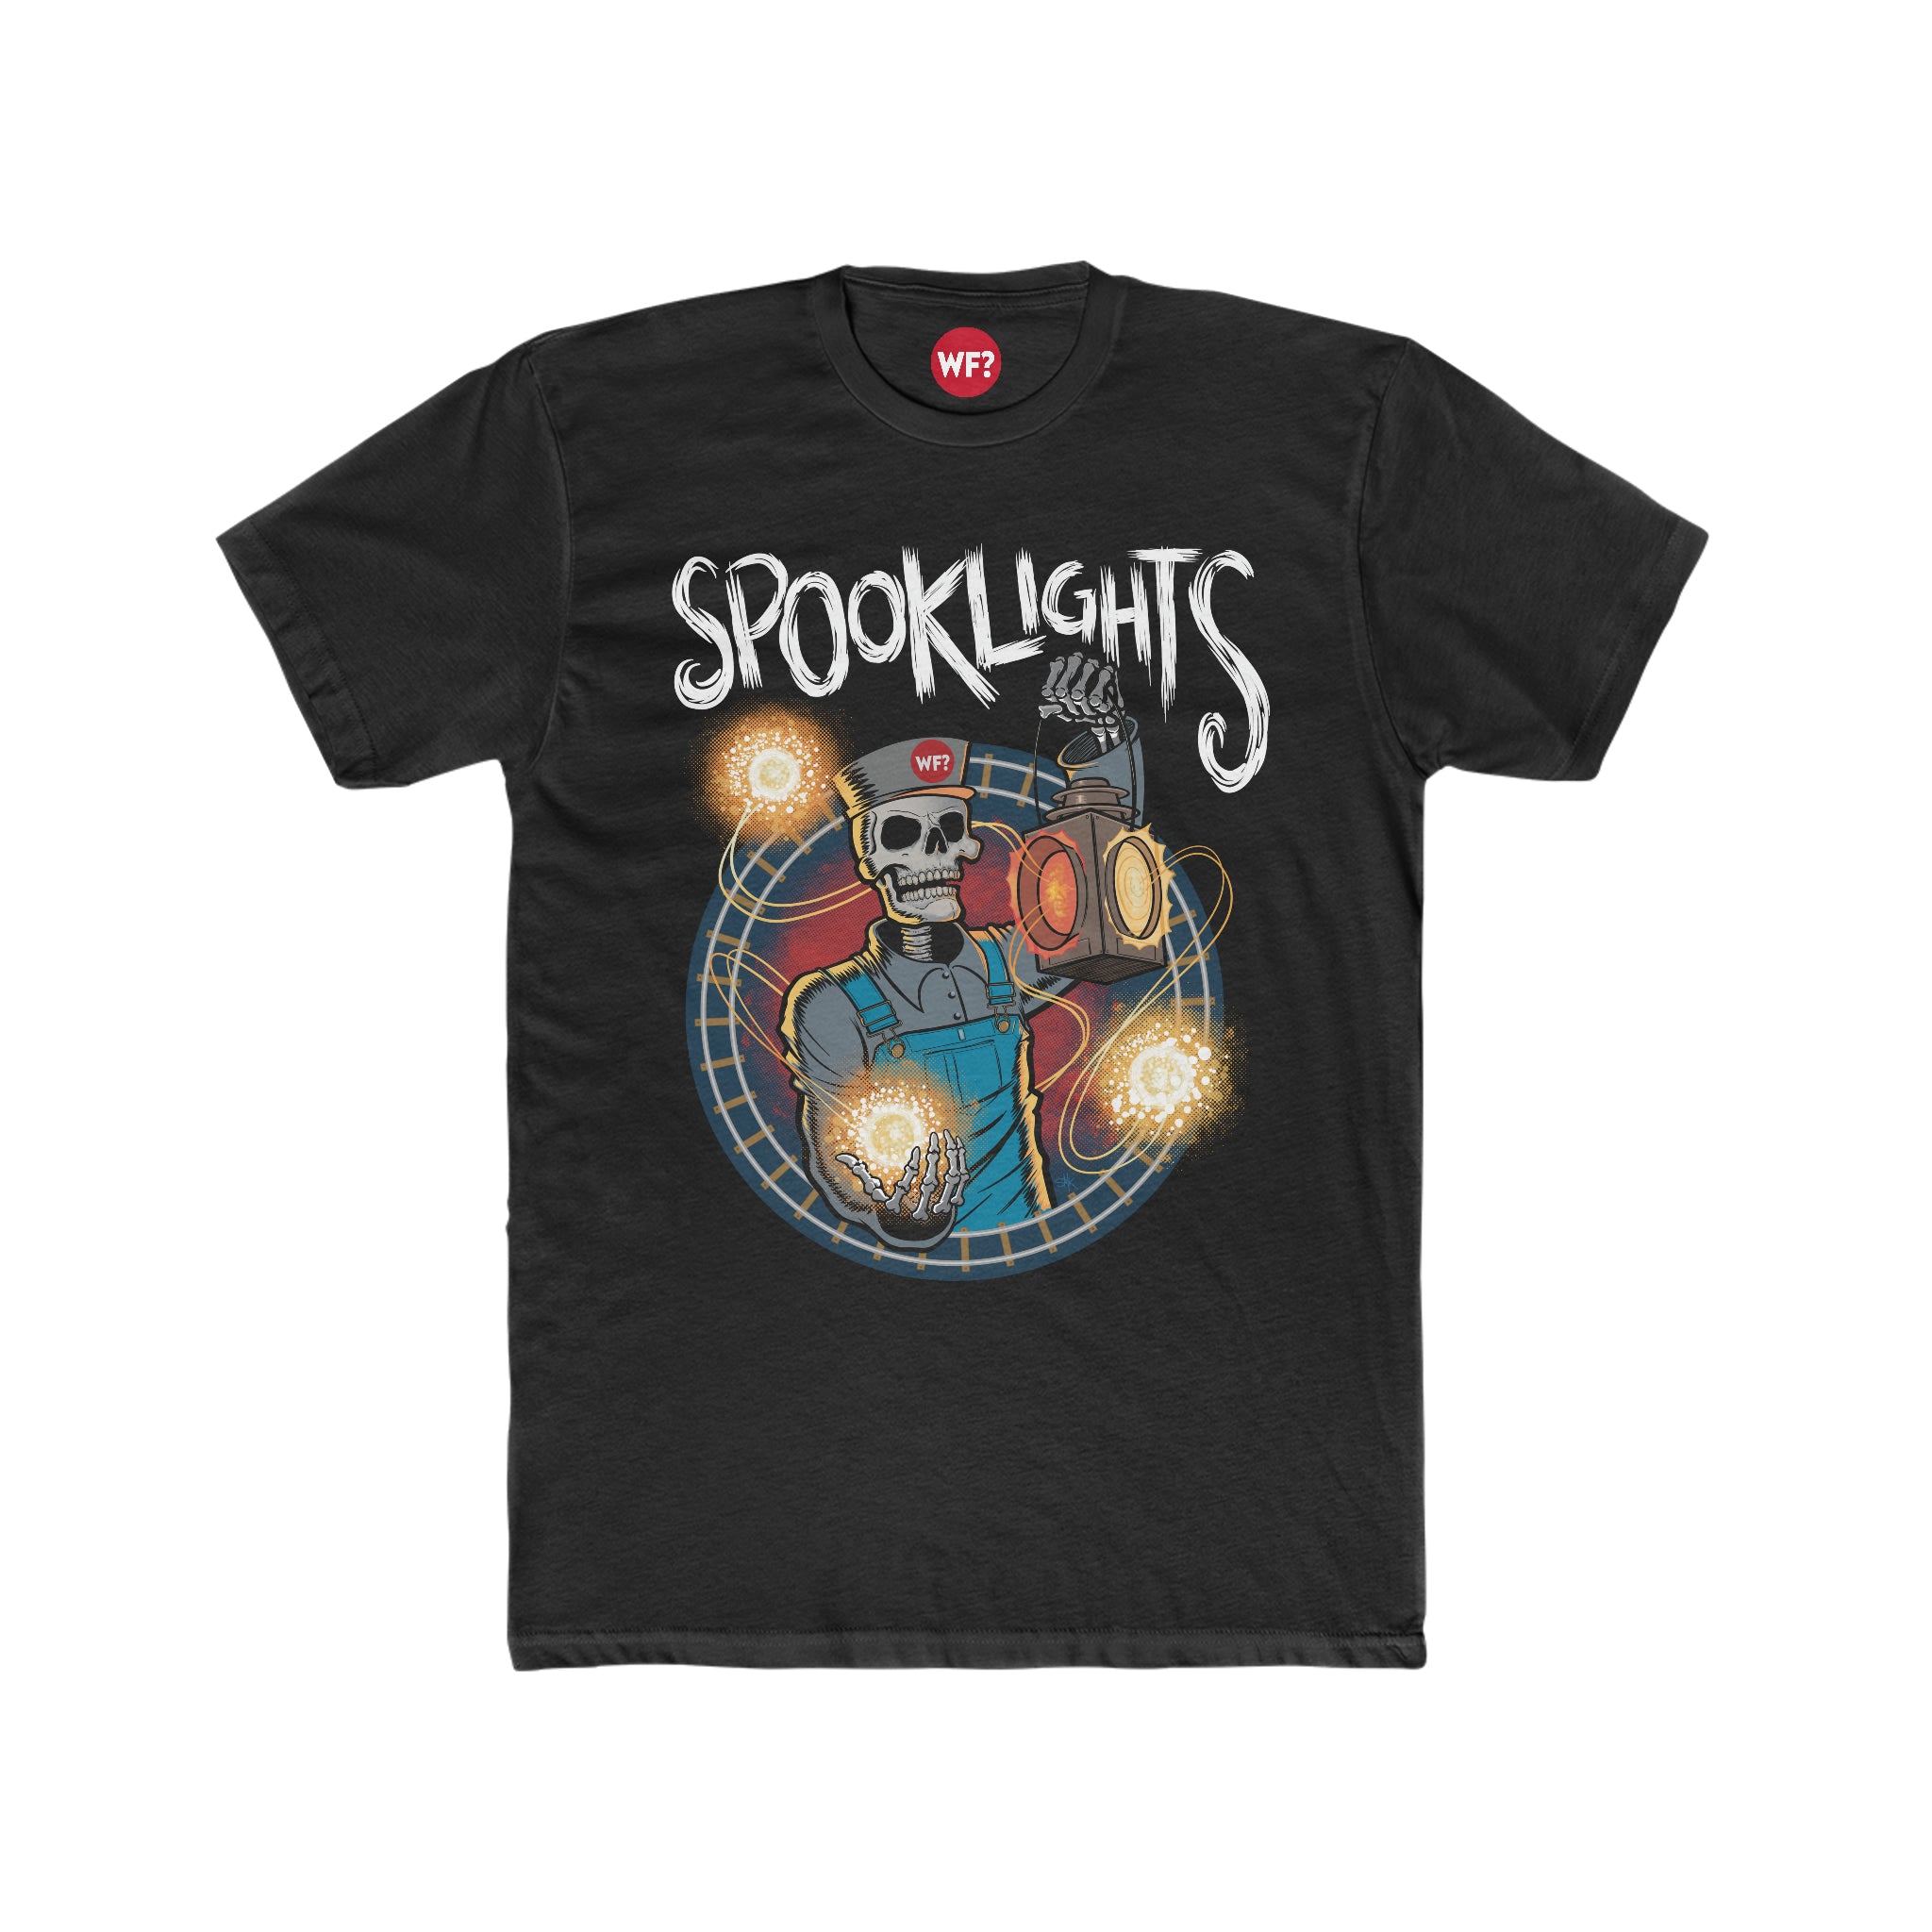 Spook Lights Limited T-Shirt